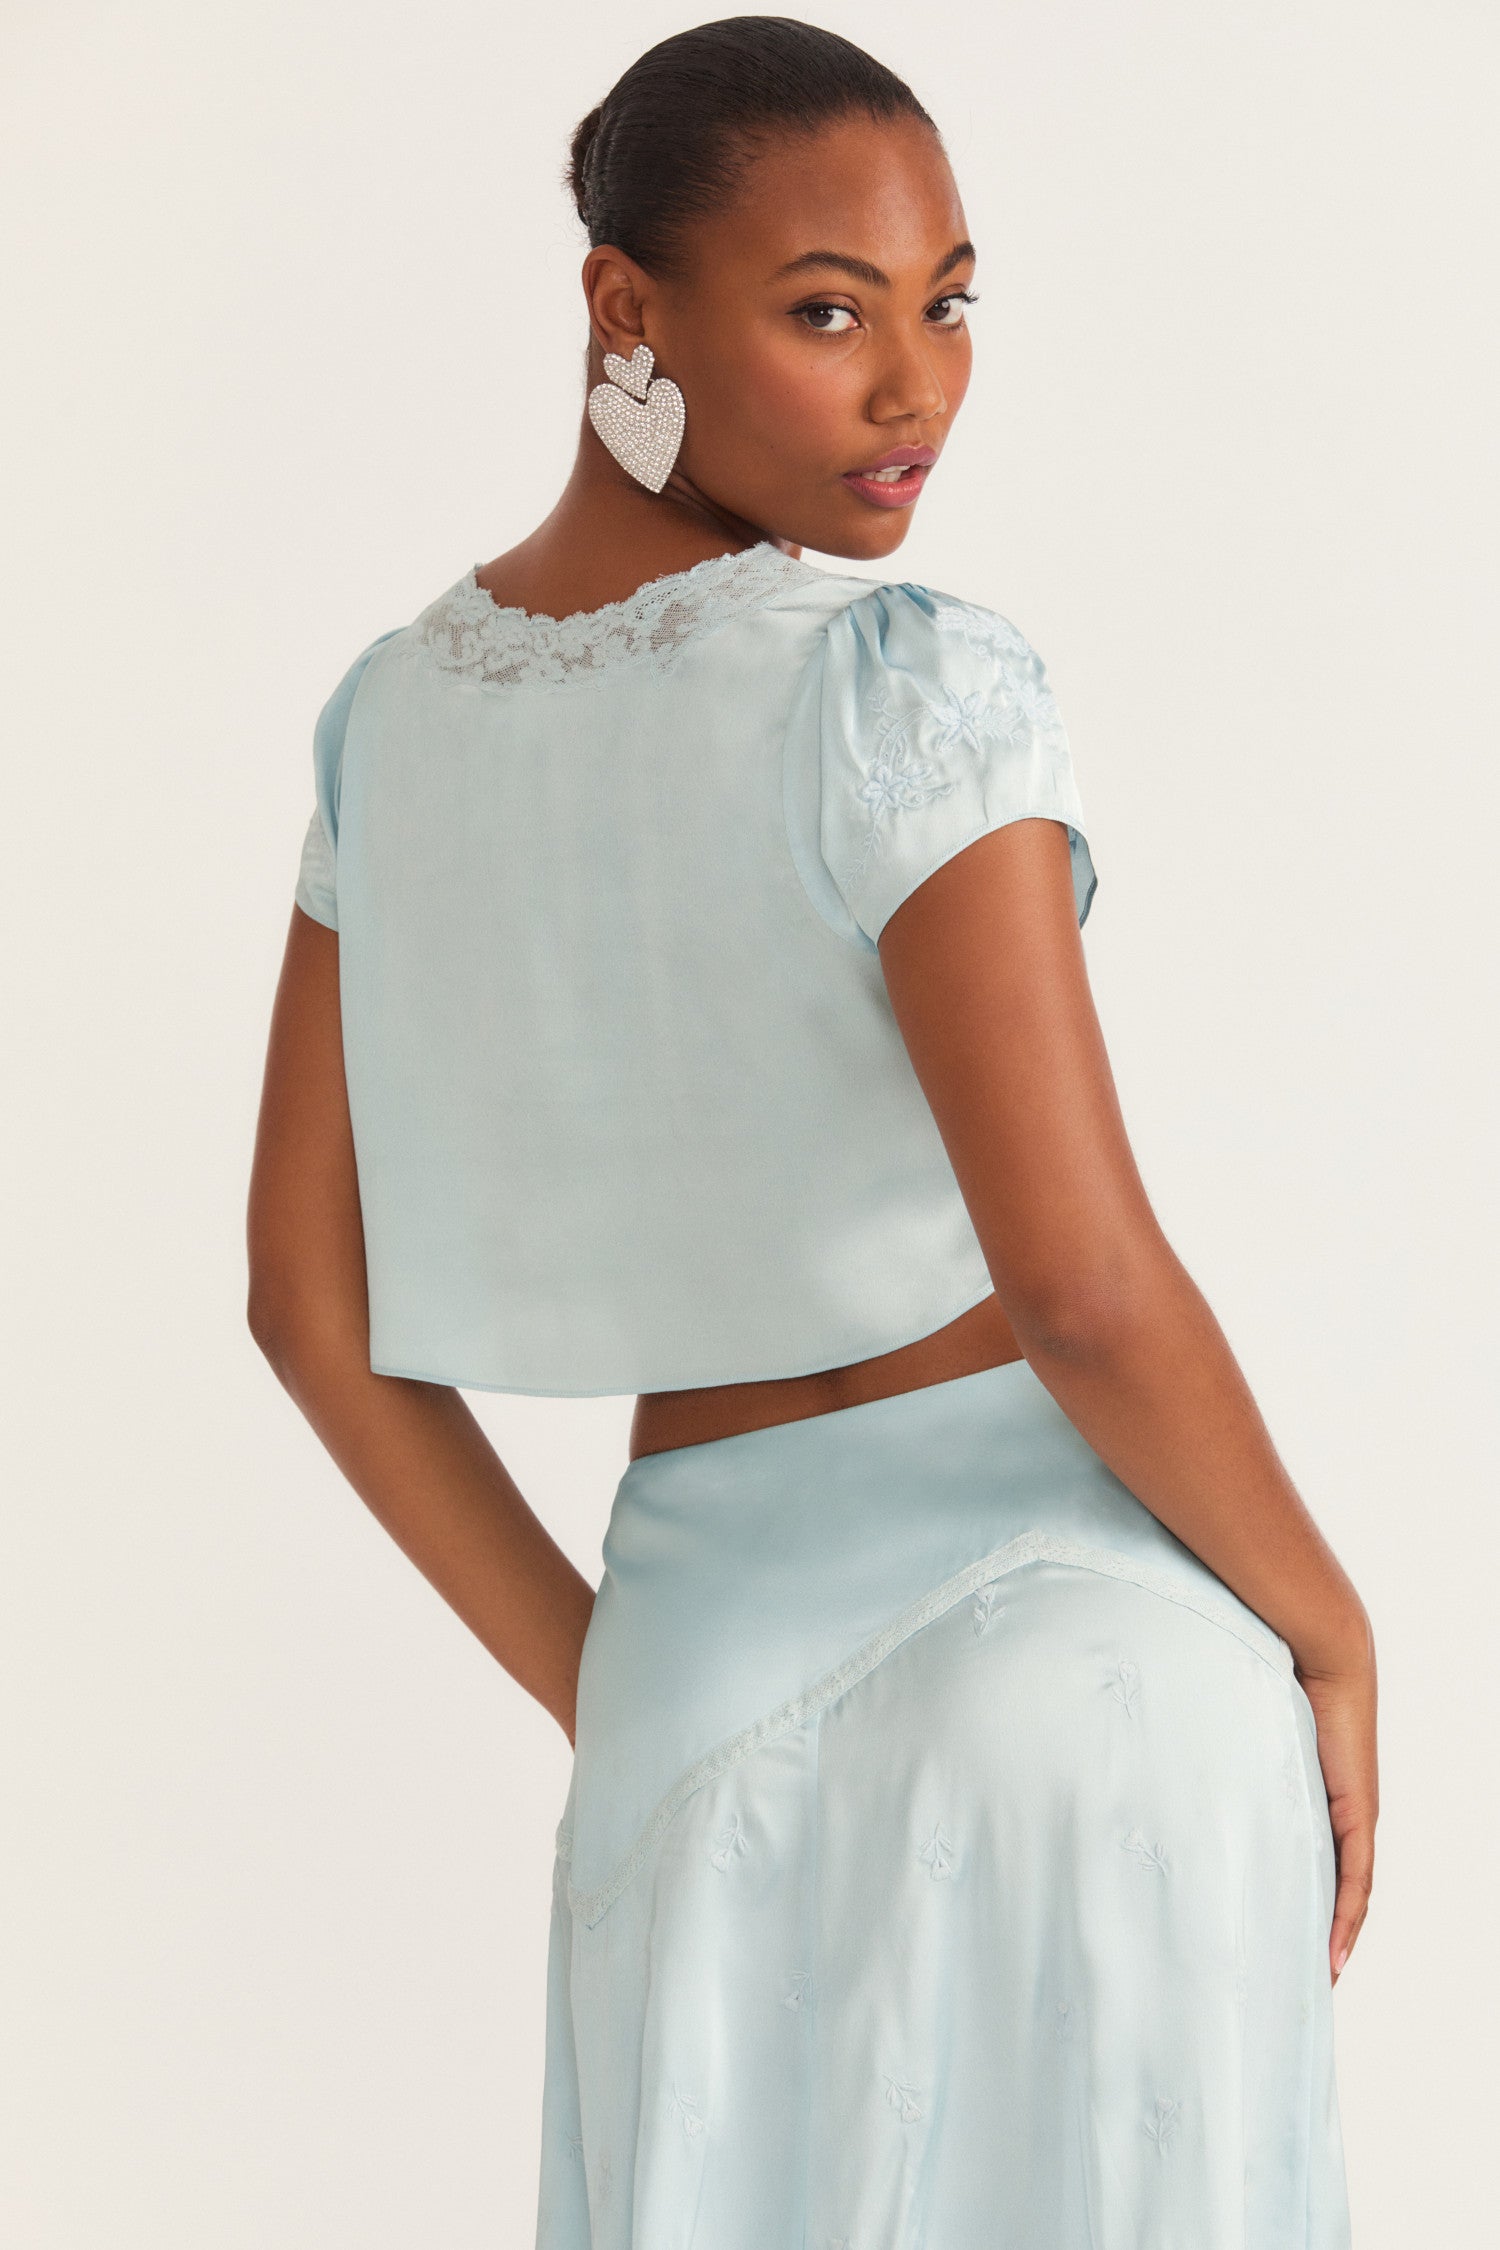 Womens blue crop top with custom embroidery and lace detail.